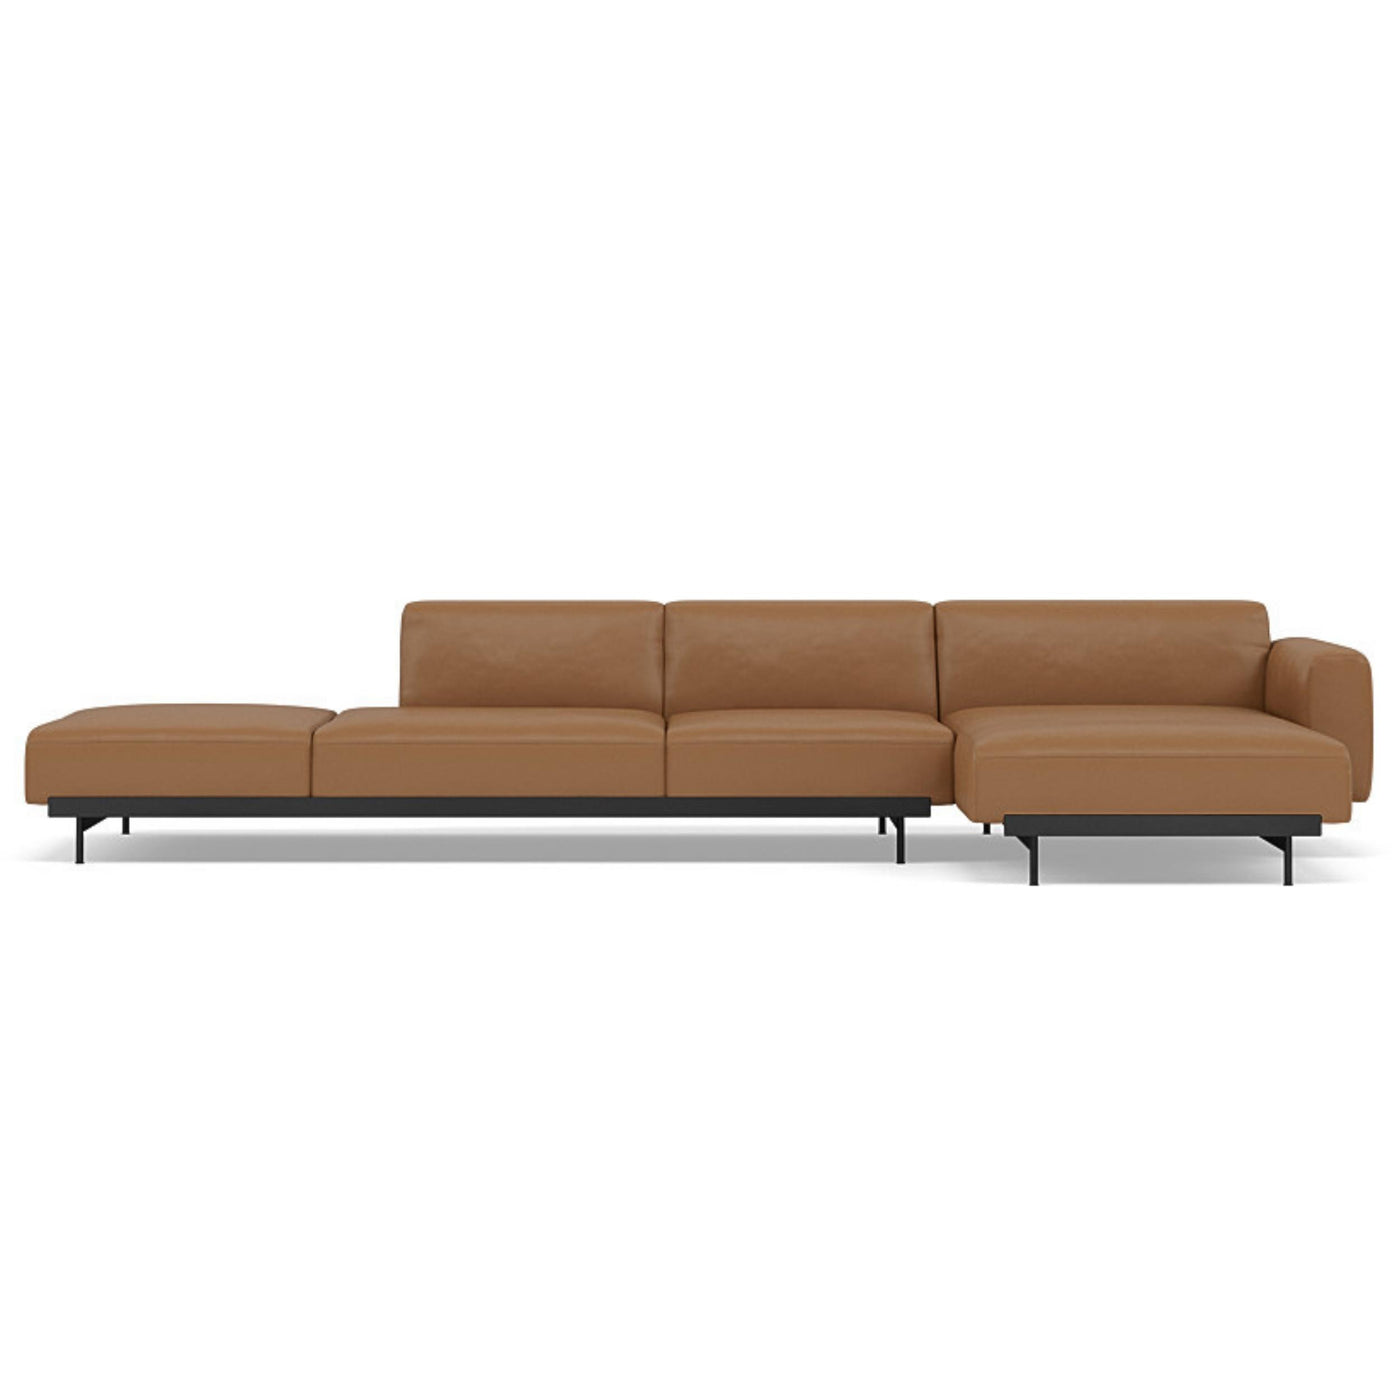 Muuto In Situ Modular 4 Seater Sofa configuration 4. Made to order from someday designs. #colour_cognac-refine-leather